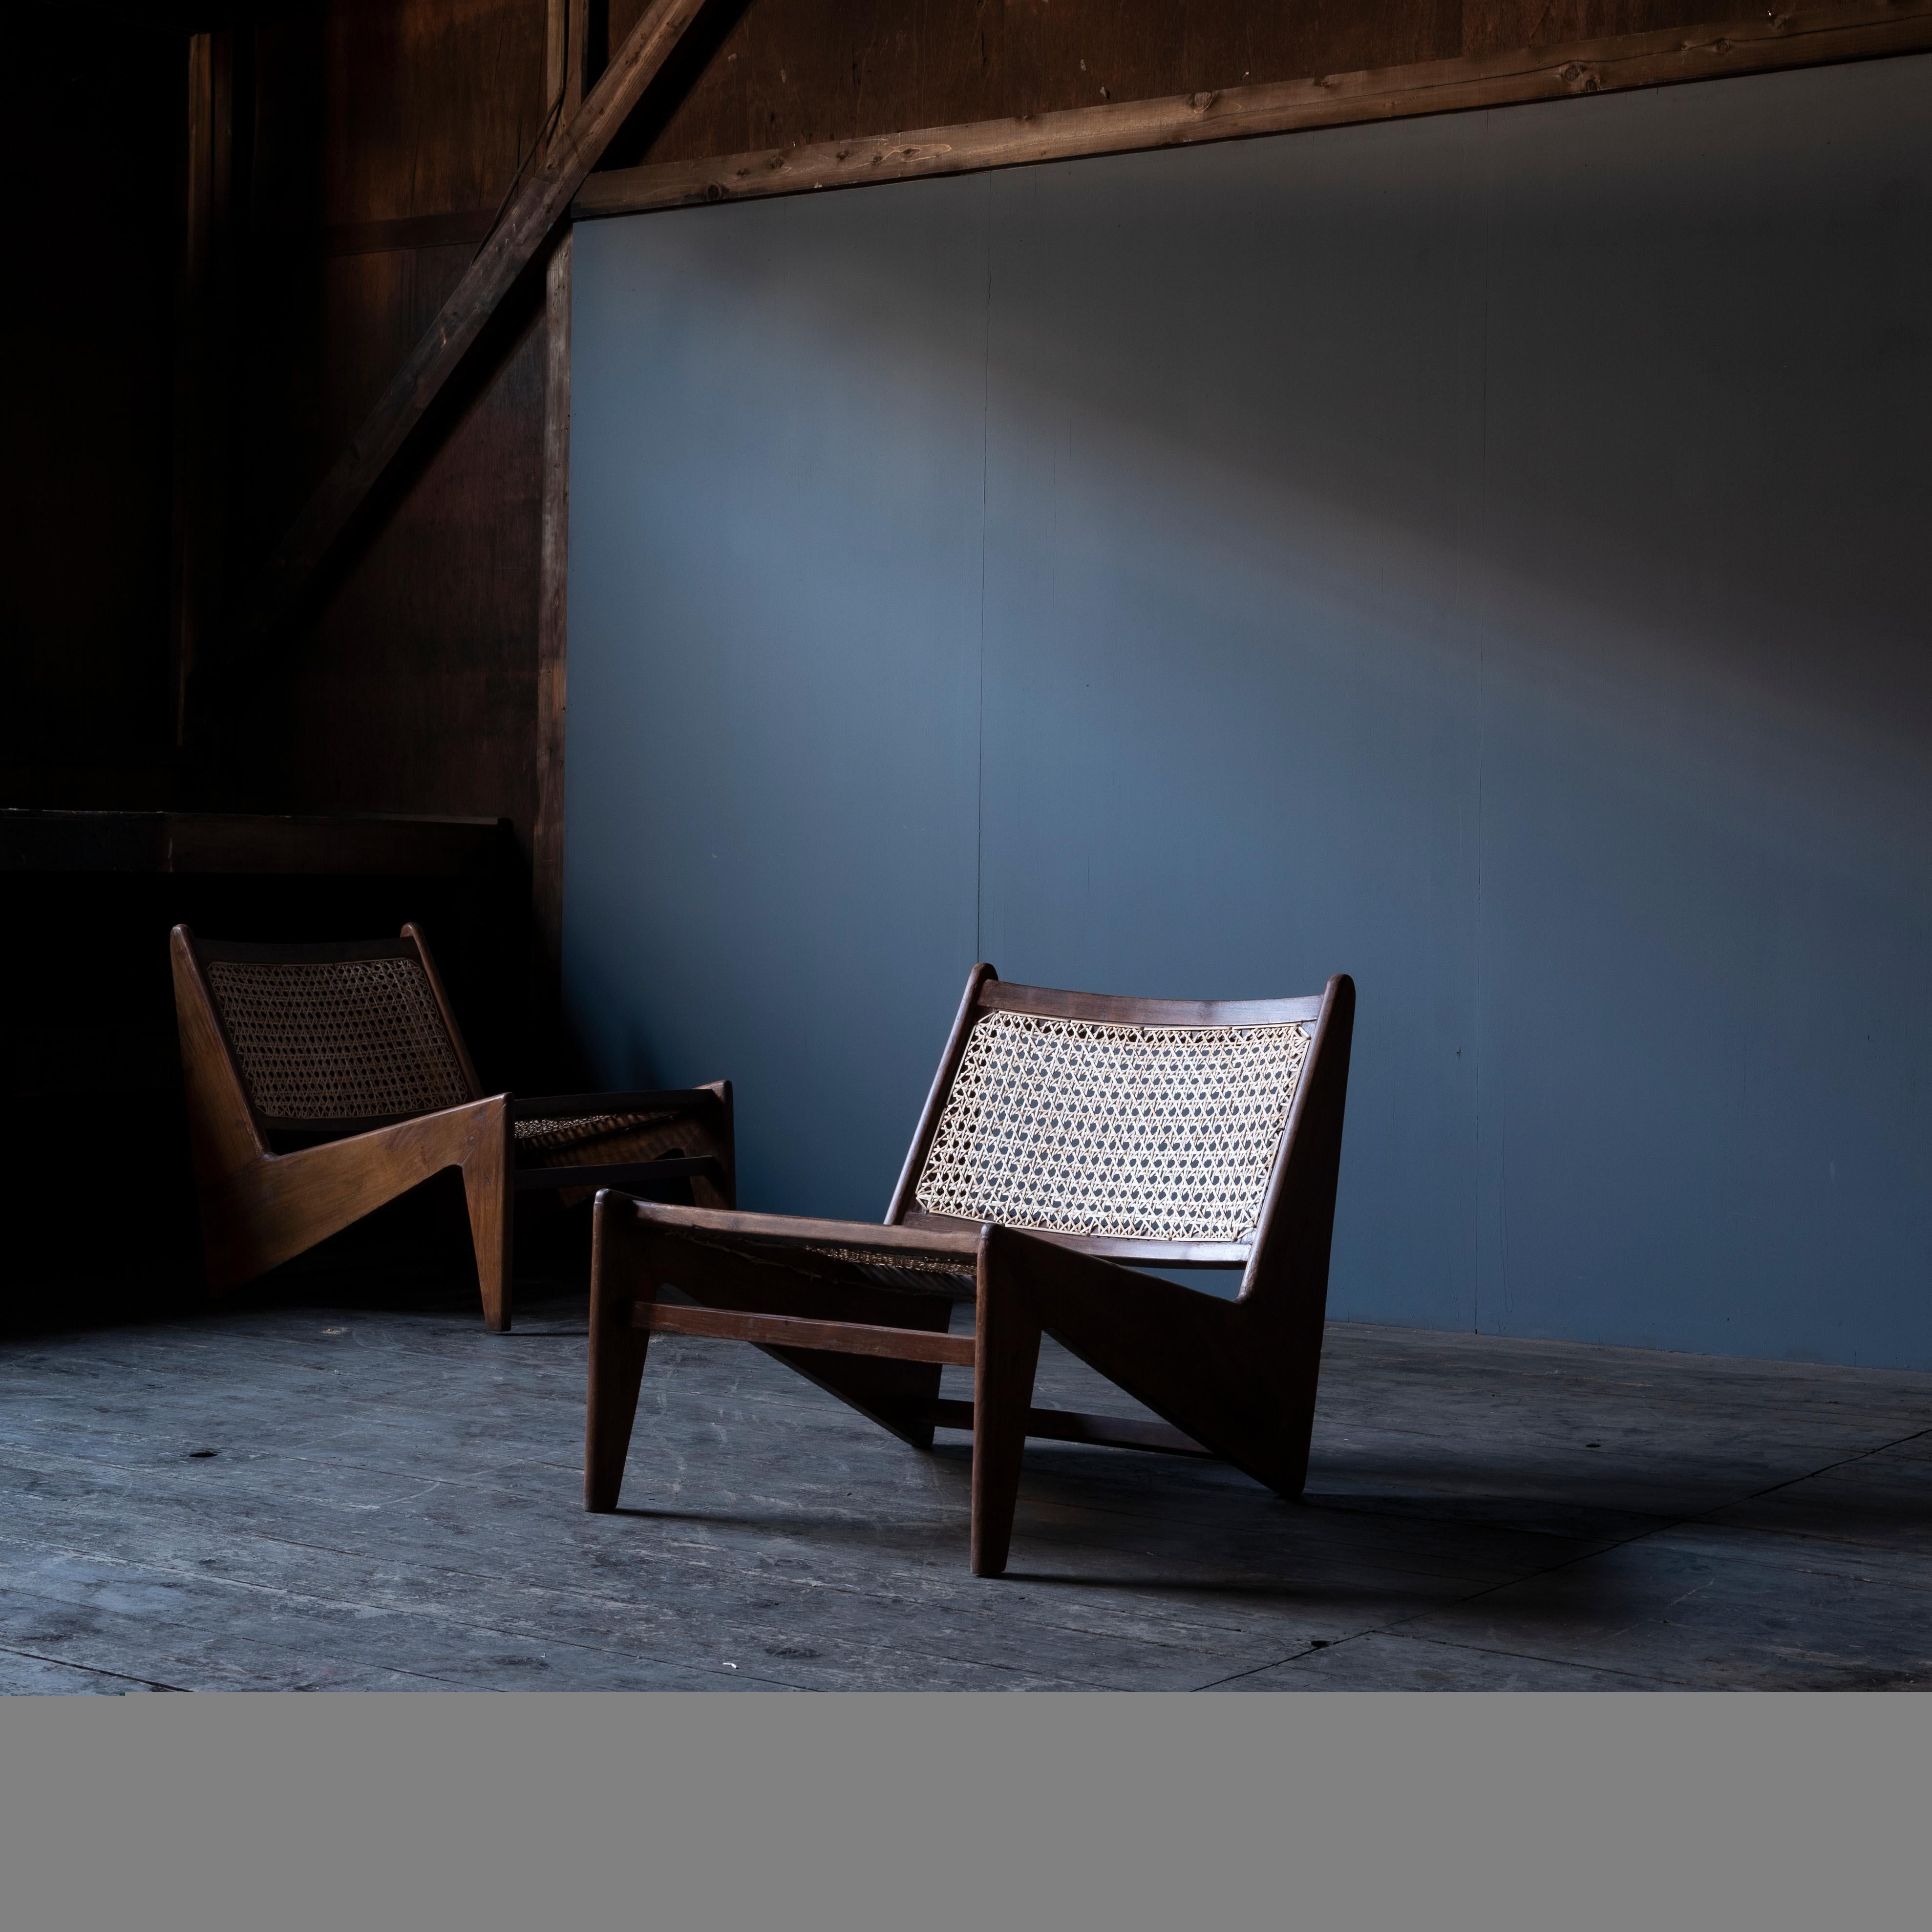 Mid-20th Century Pierre Jeanneret Kangaroo Chair, Circa 1950s, Chandigarh, India For Sale